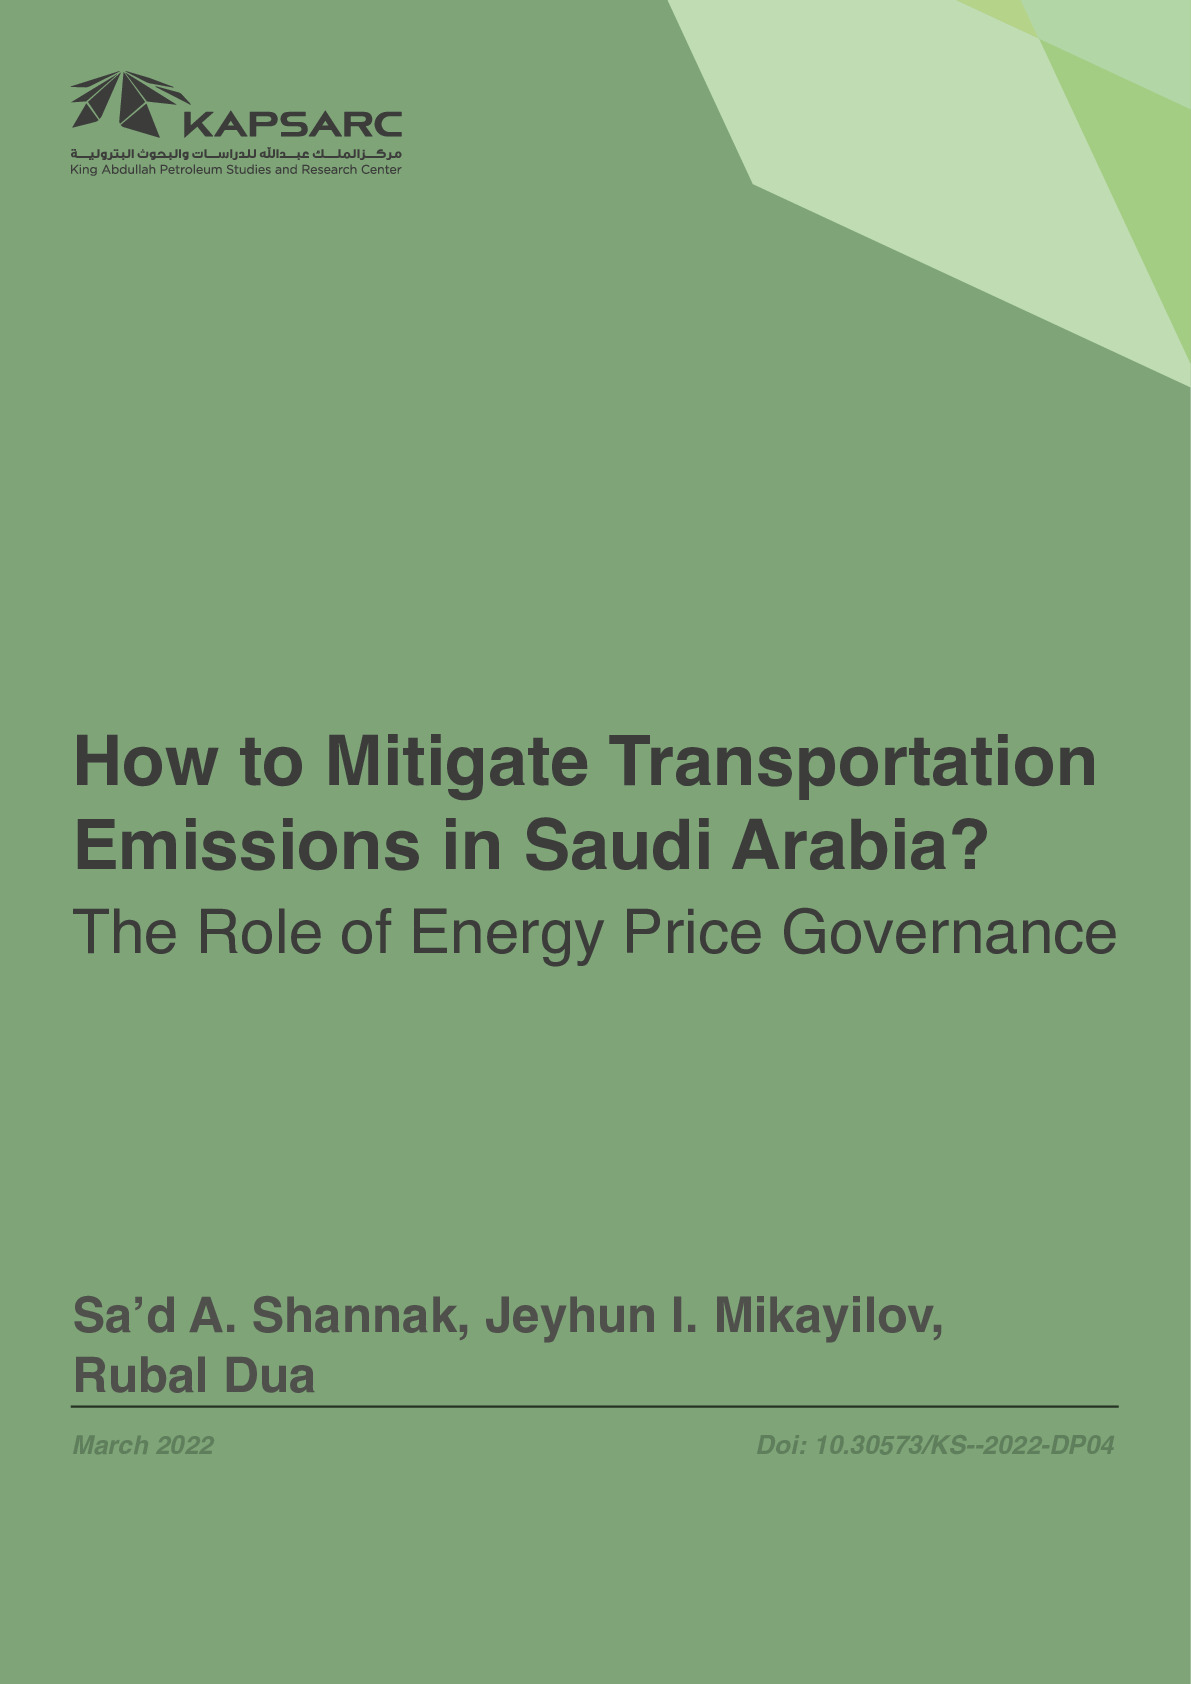 How to Mitigate Transportation Emissions in Saudi Arabia? The Role of Energy Price Governance